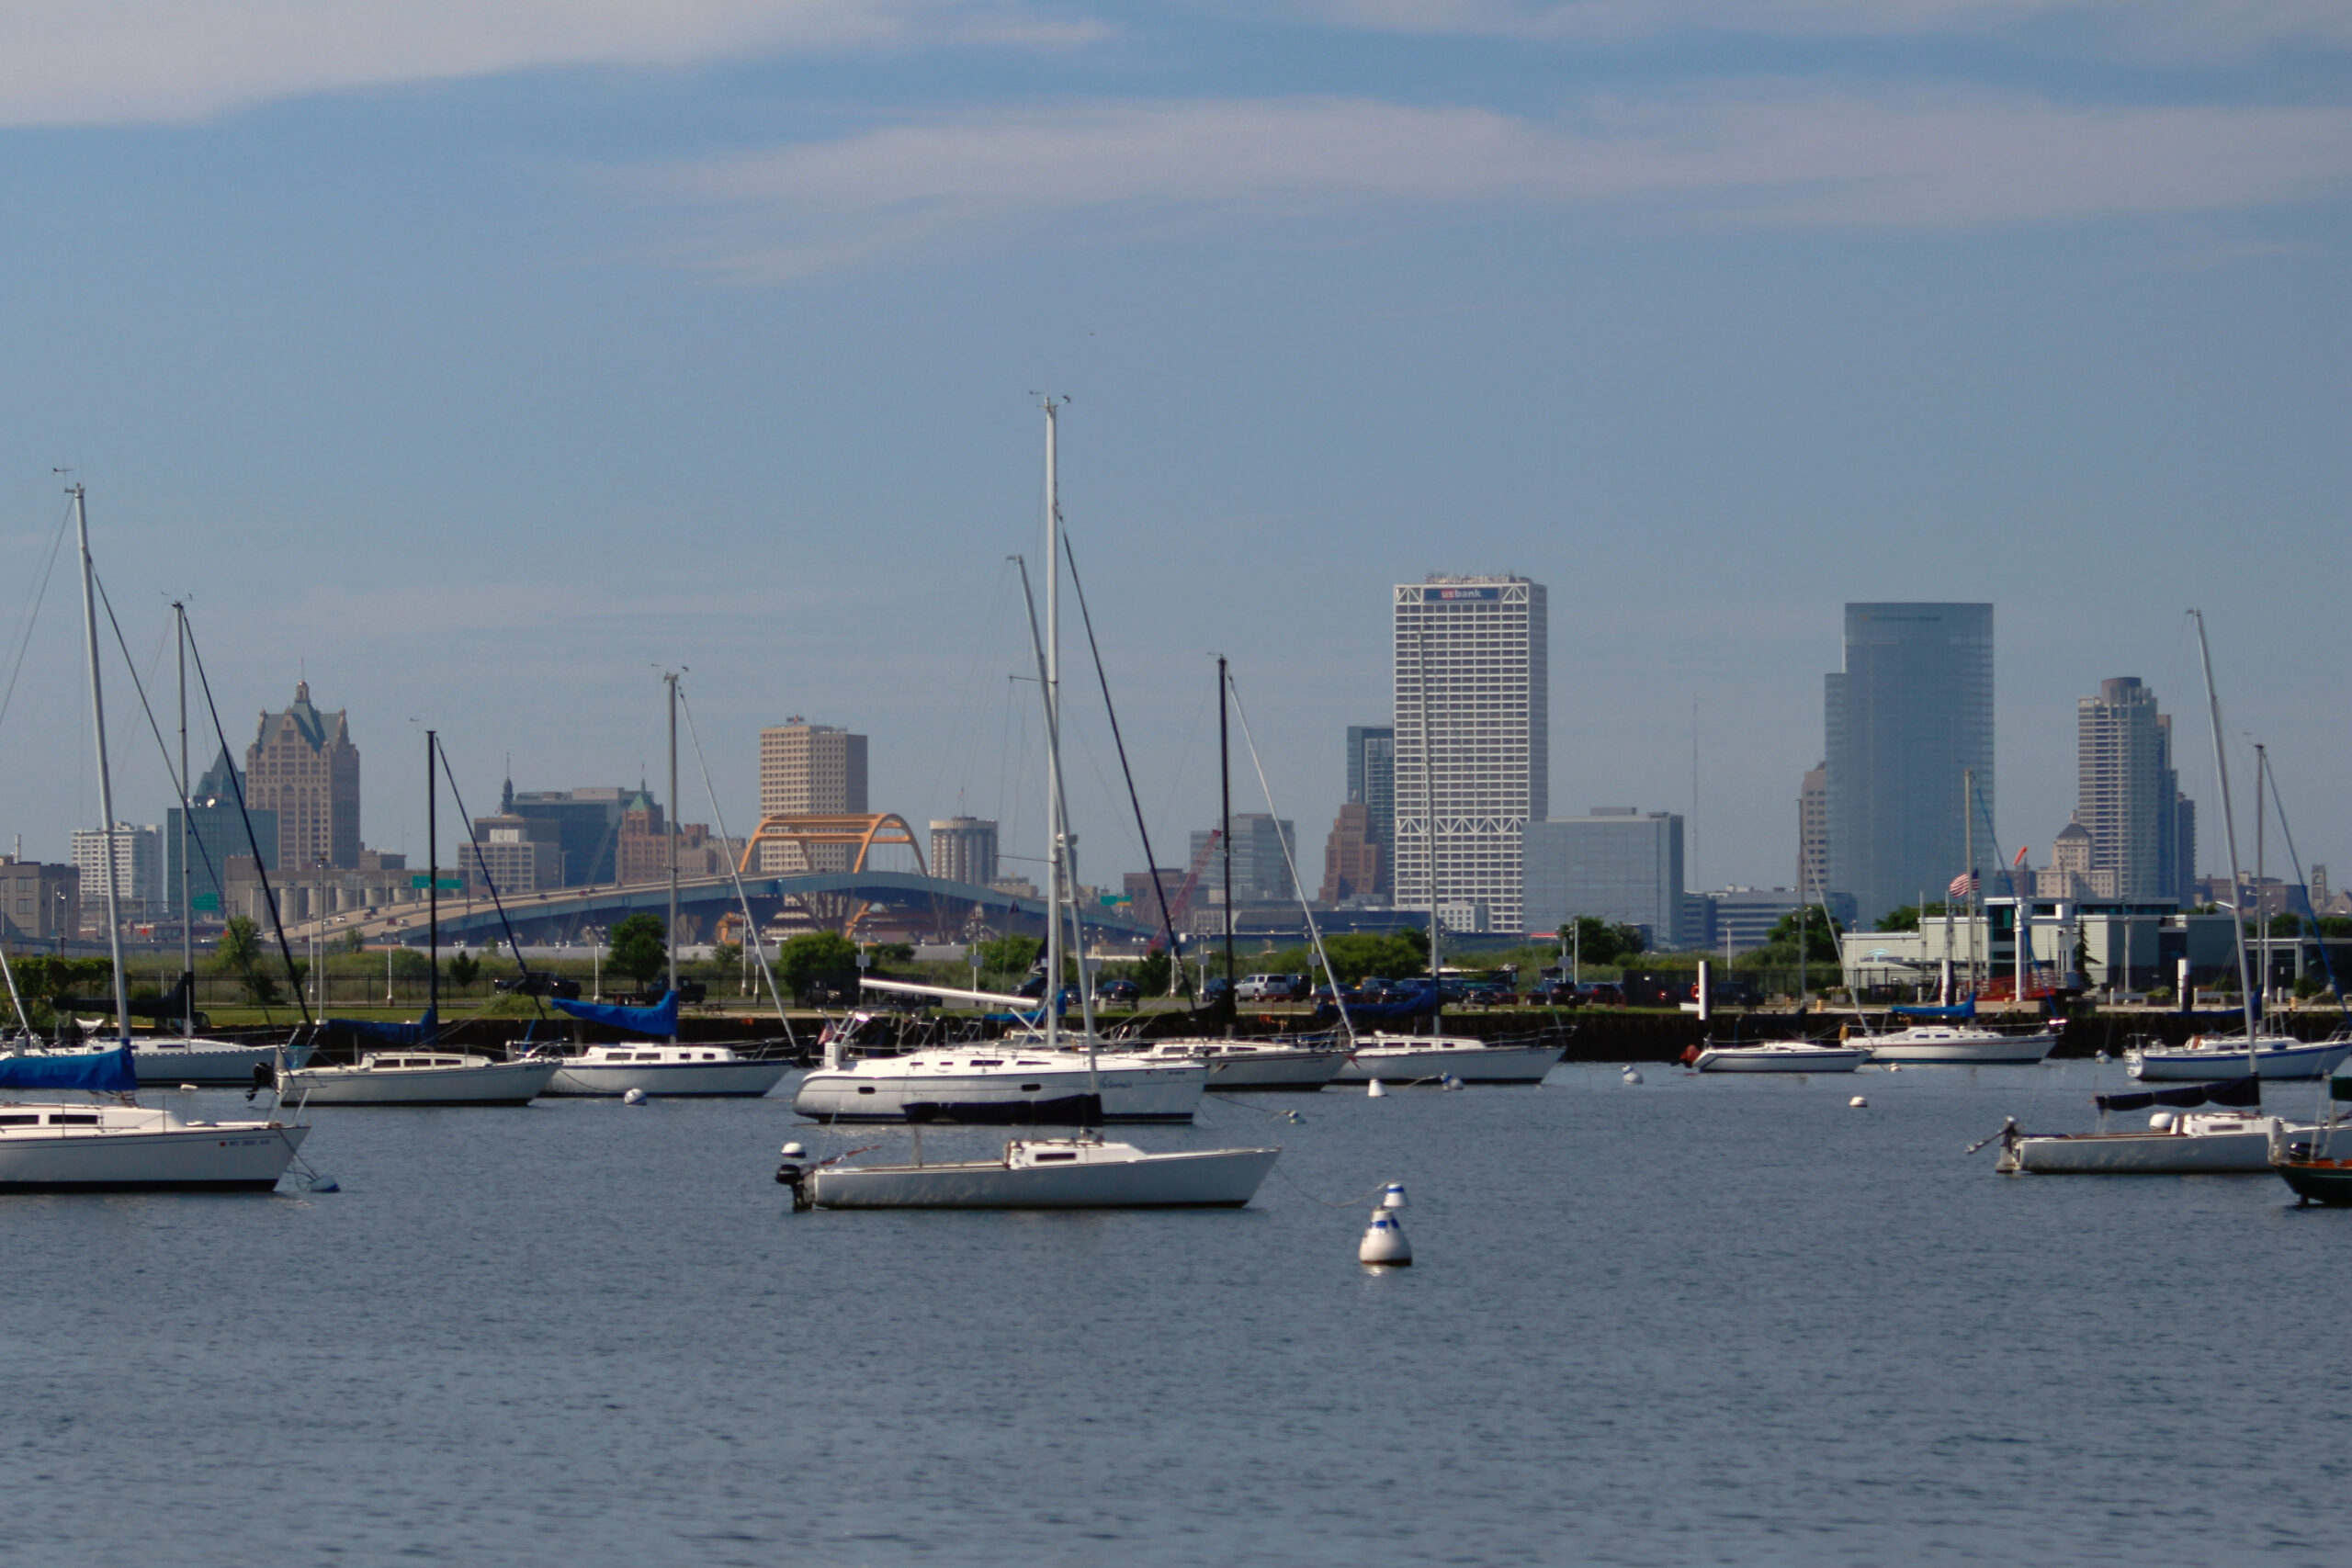 At least a dozen sailboats float off the shore of Milwaukee. The city's skyline is in the background.